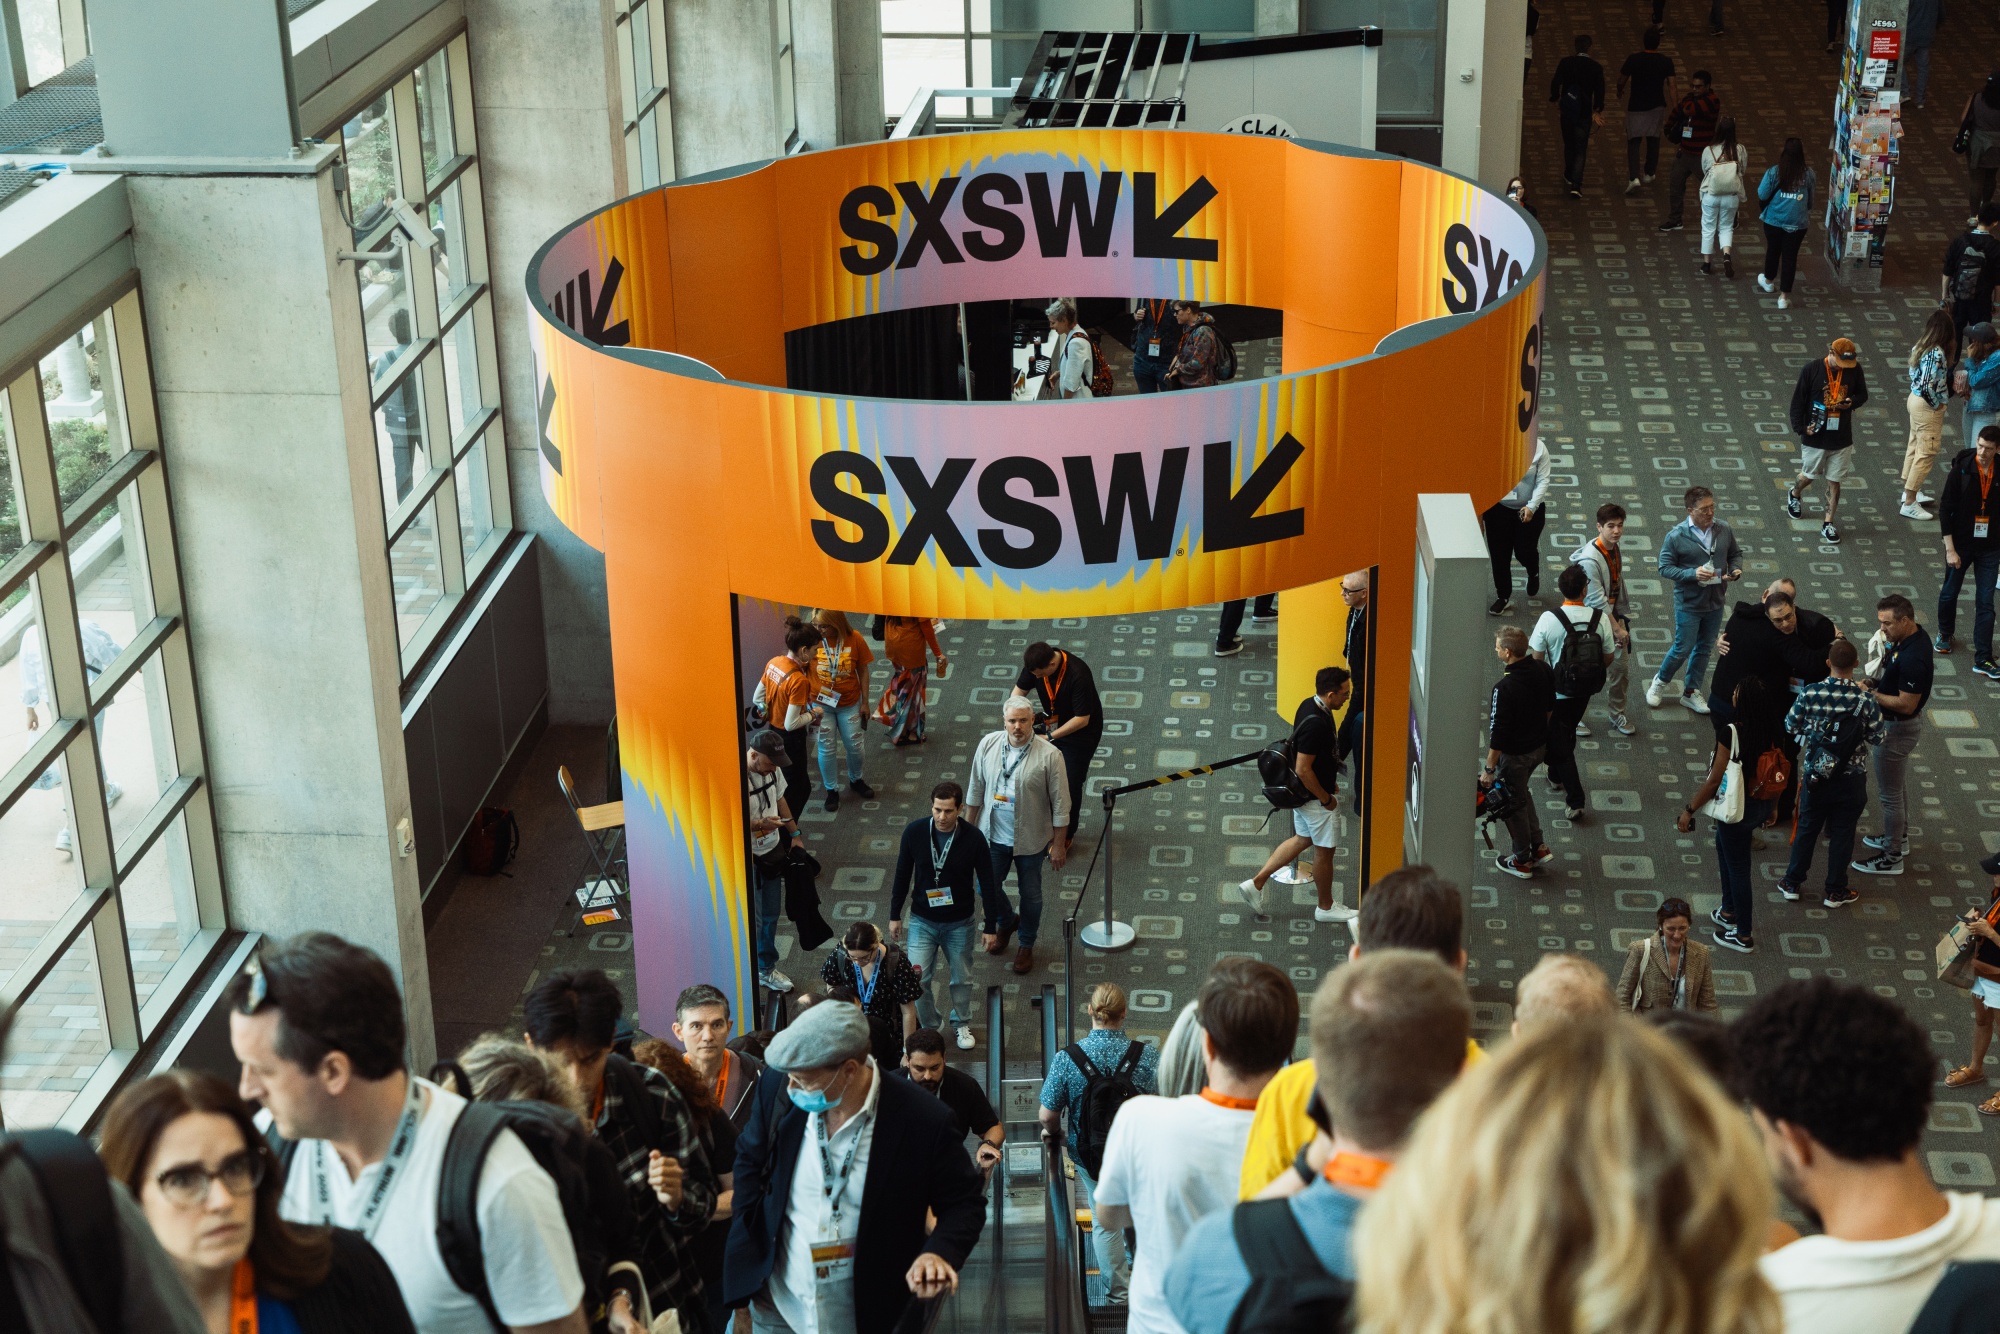 Attendees during the South by Southwest festival in Austin, Texas.